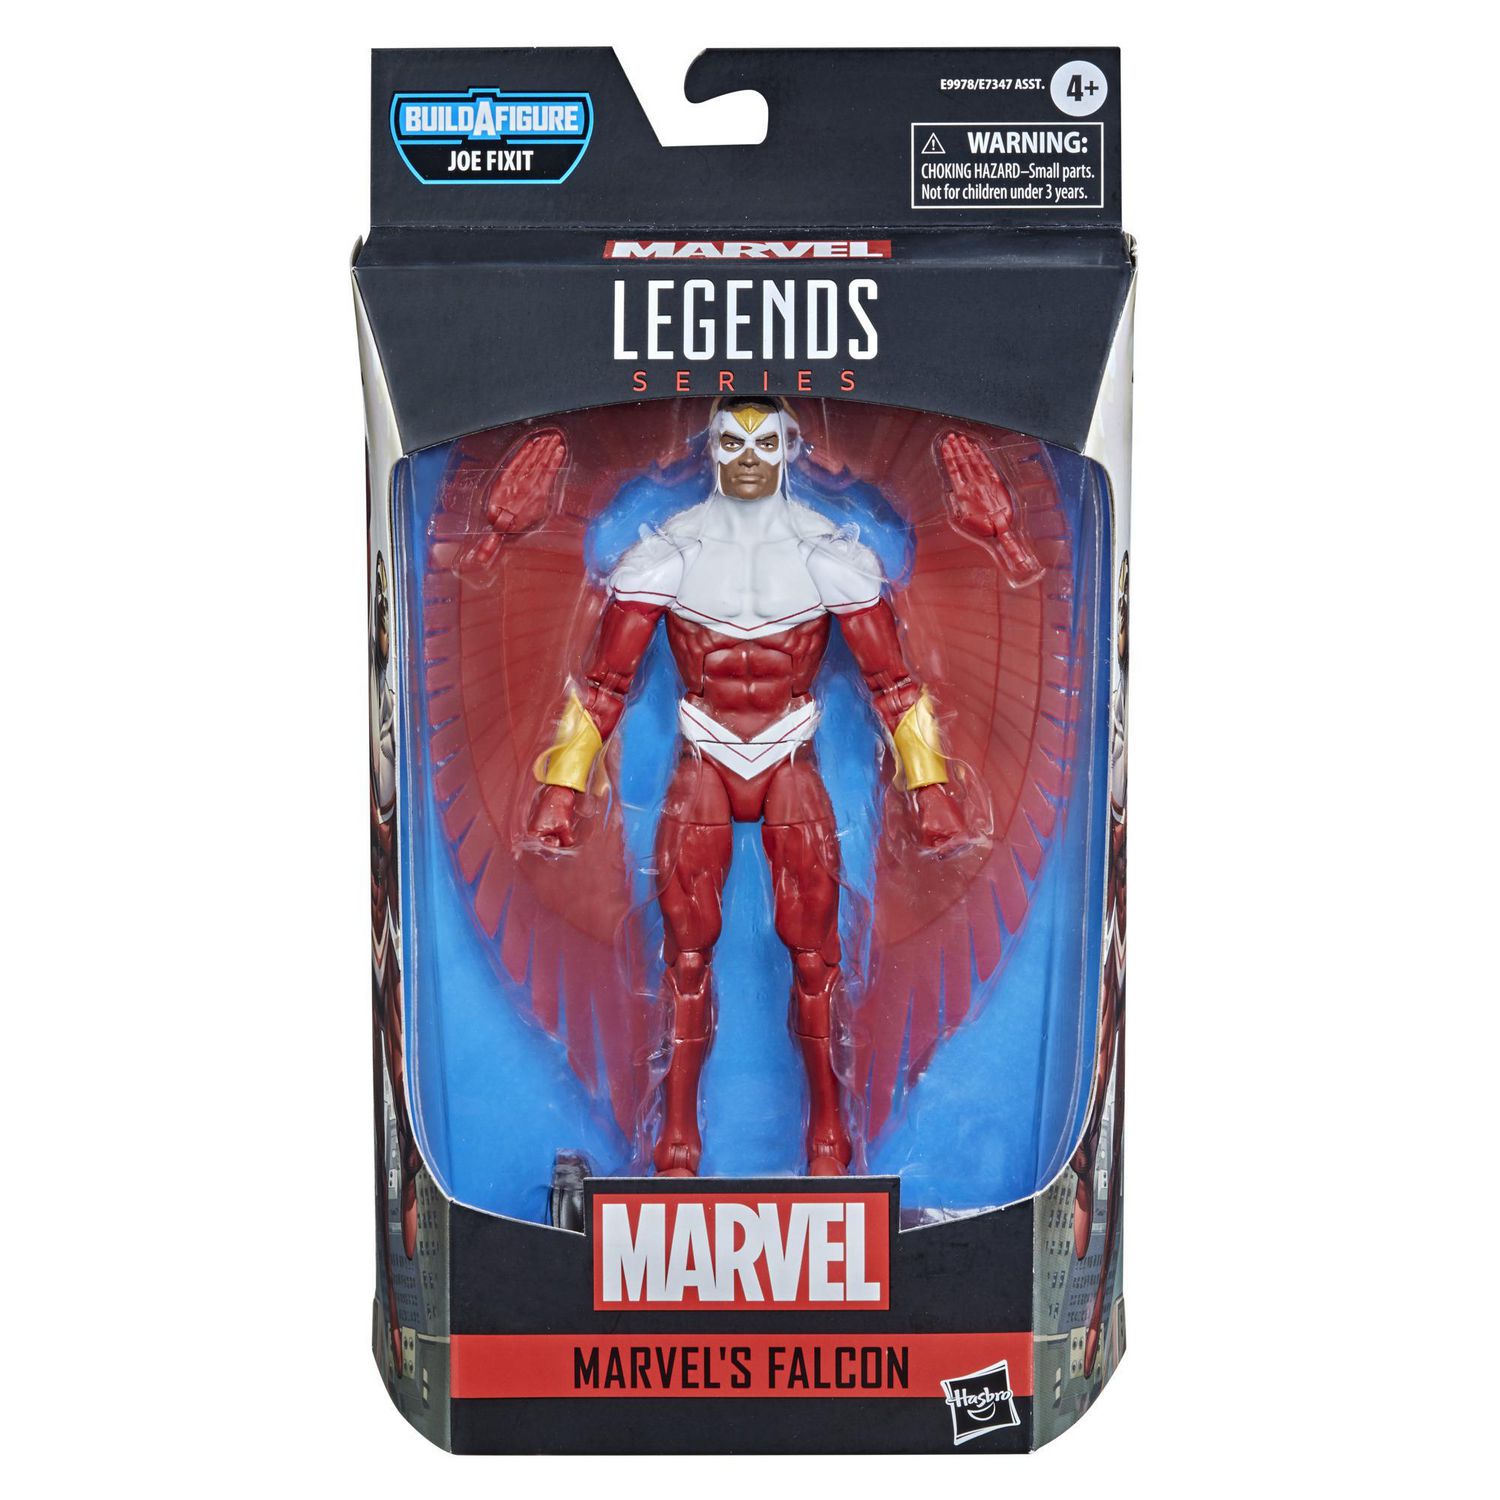 Hasbro Marvel Legends Series 6-inch Collectible Marvel's Falcon Action  Figure Toy, Ages 4 And Up